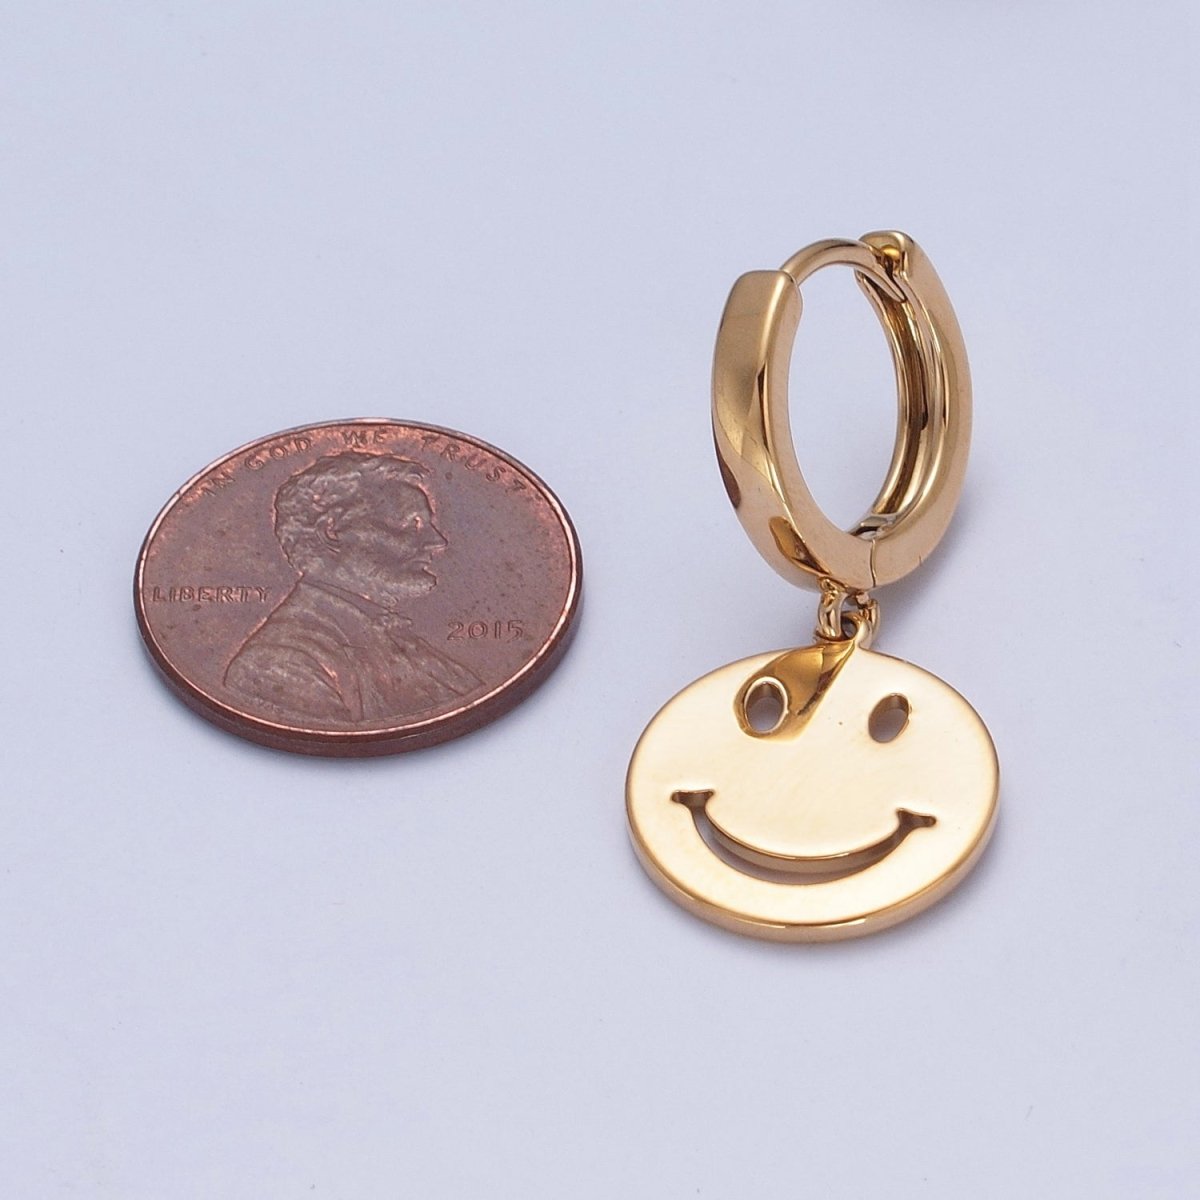 OS 24K Gold Filled Minimalist Smiley Face Coin Charm Dangle Huggie Hoop Earrings Q-455 - DLUXCA